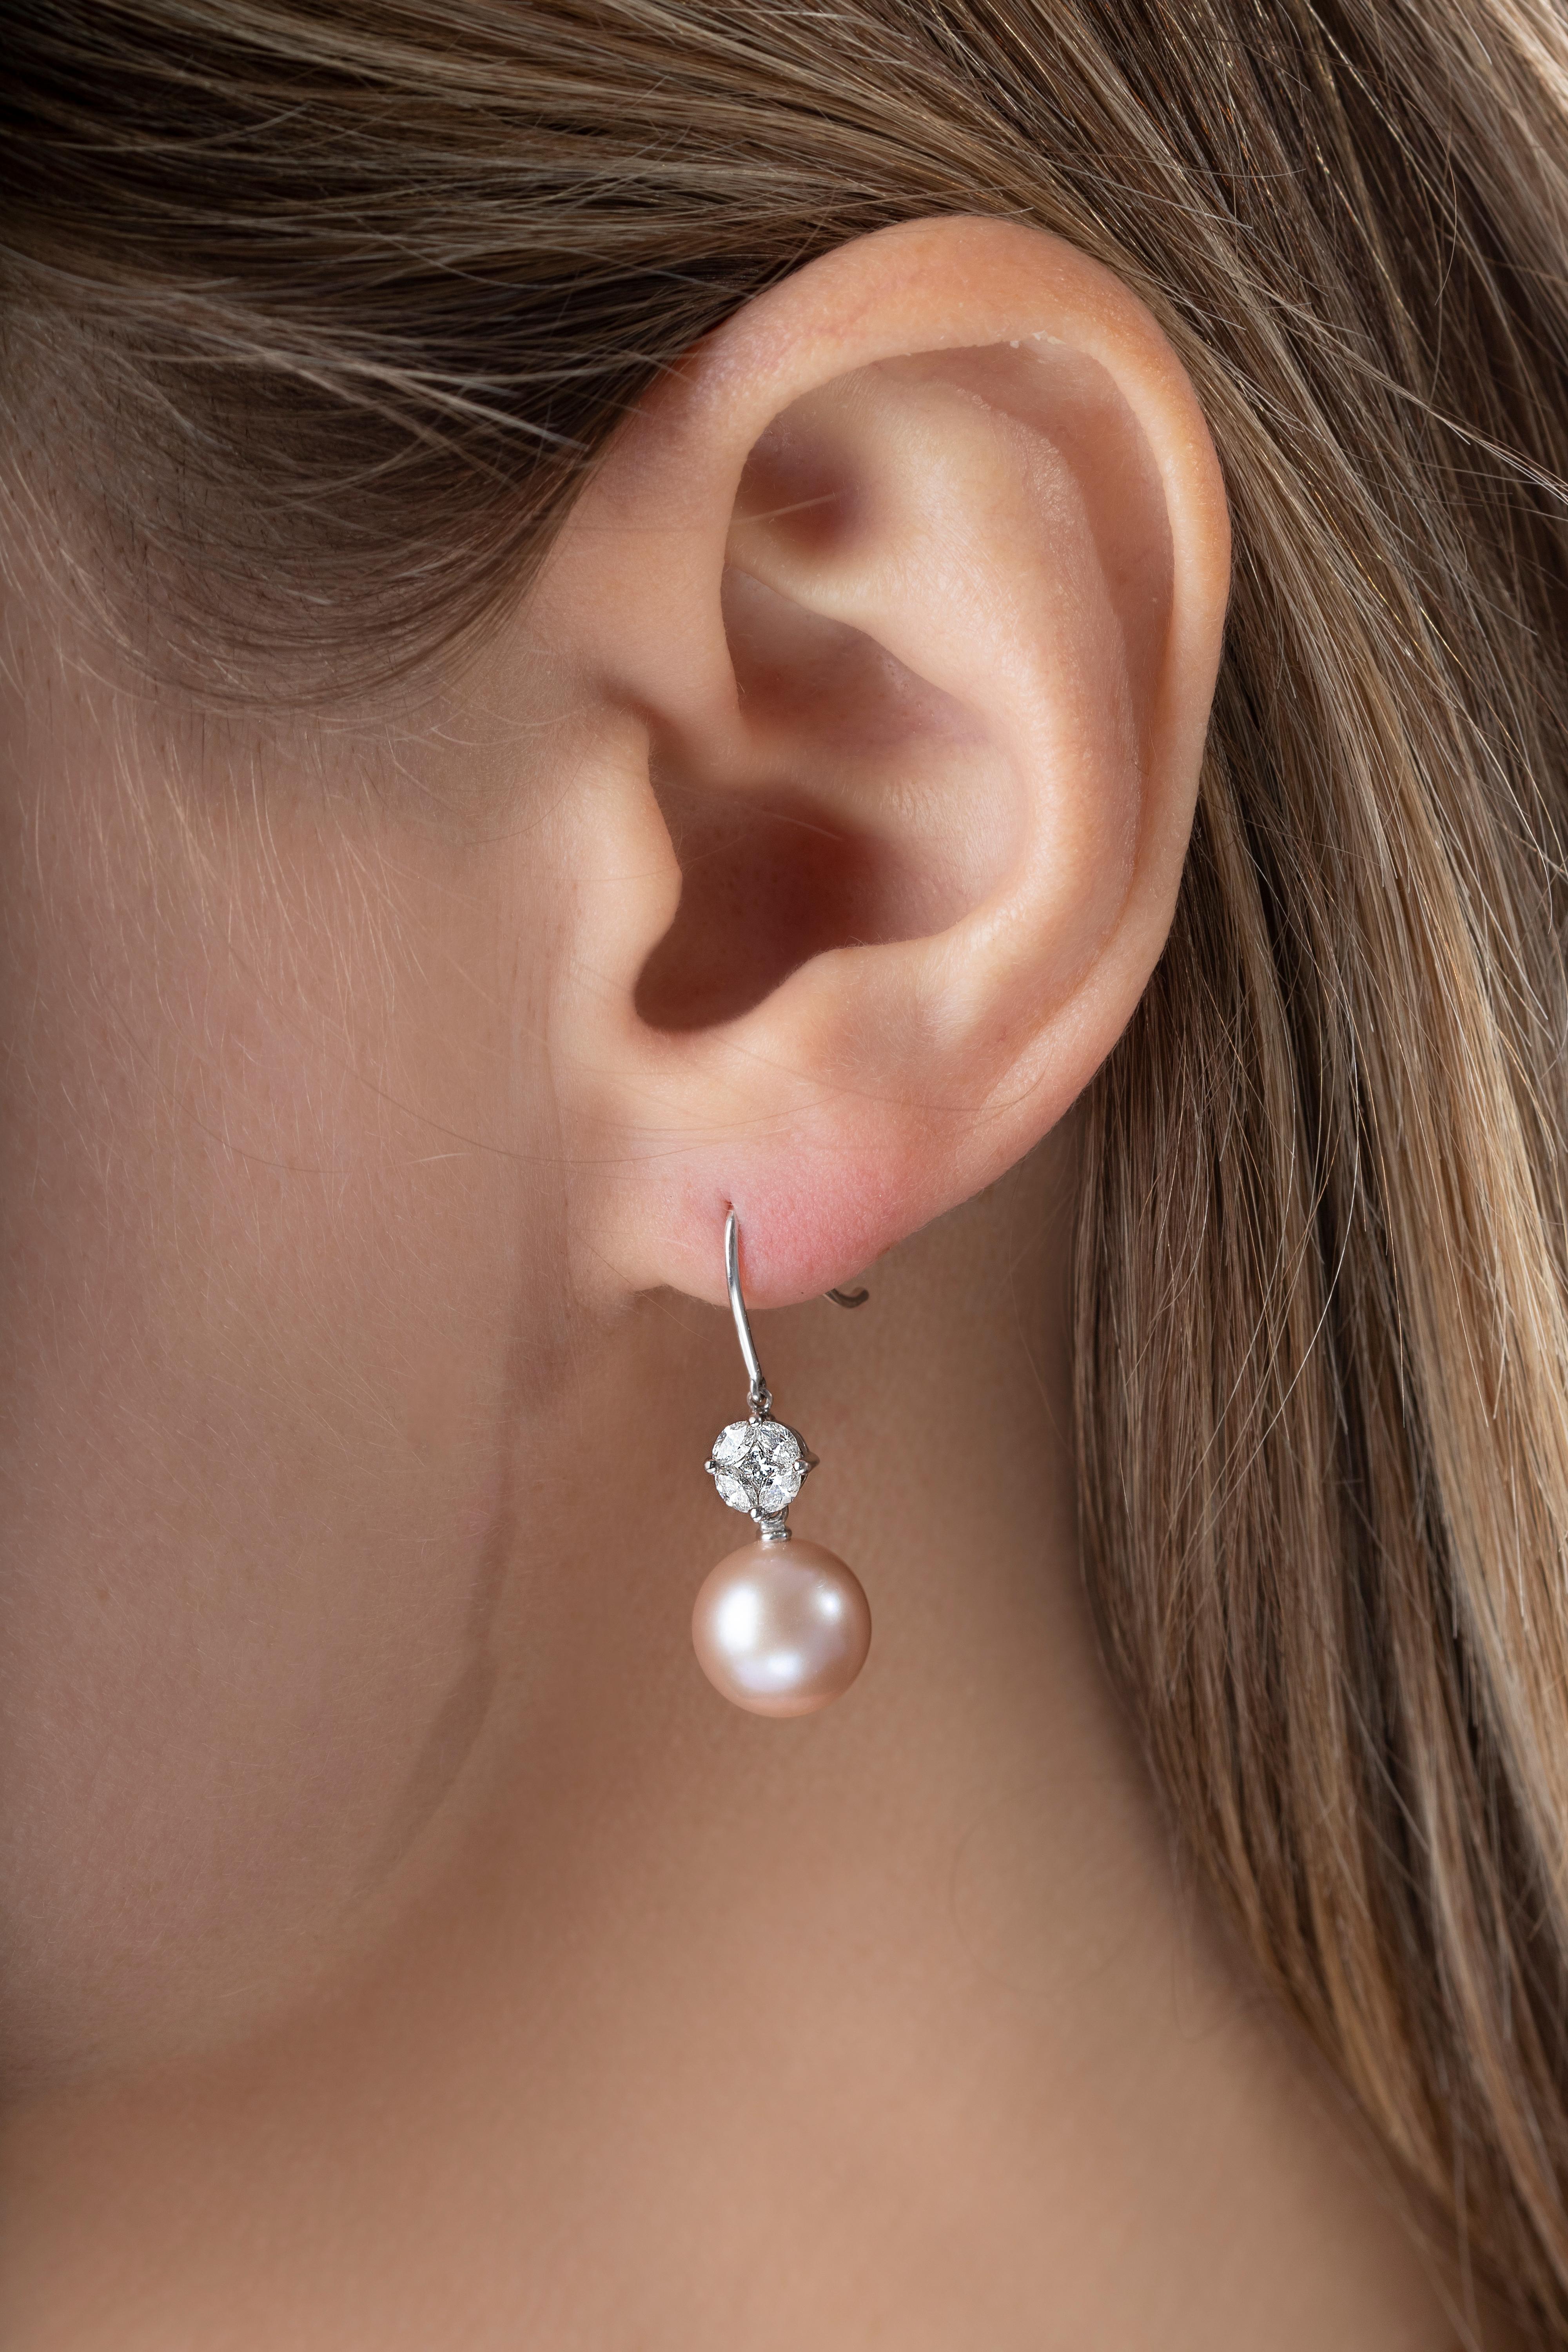 This pretty earrings by Yoko London feature top quality natural coloured pink Freshwater Pearl suspended from an elegant marquise and princess cut cluster of diamonds. Bright and airy, these earrings will add a touch of femininity to every outfit